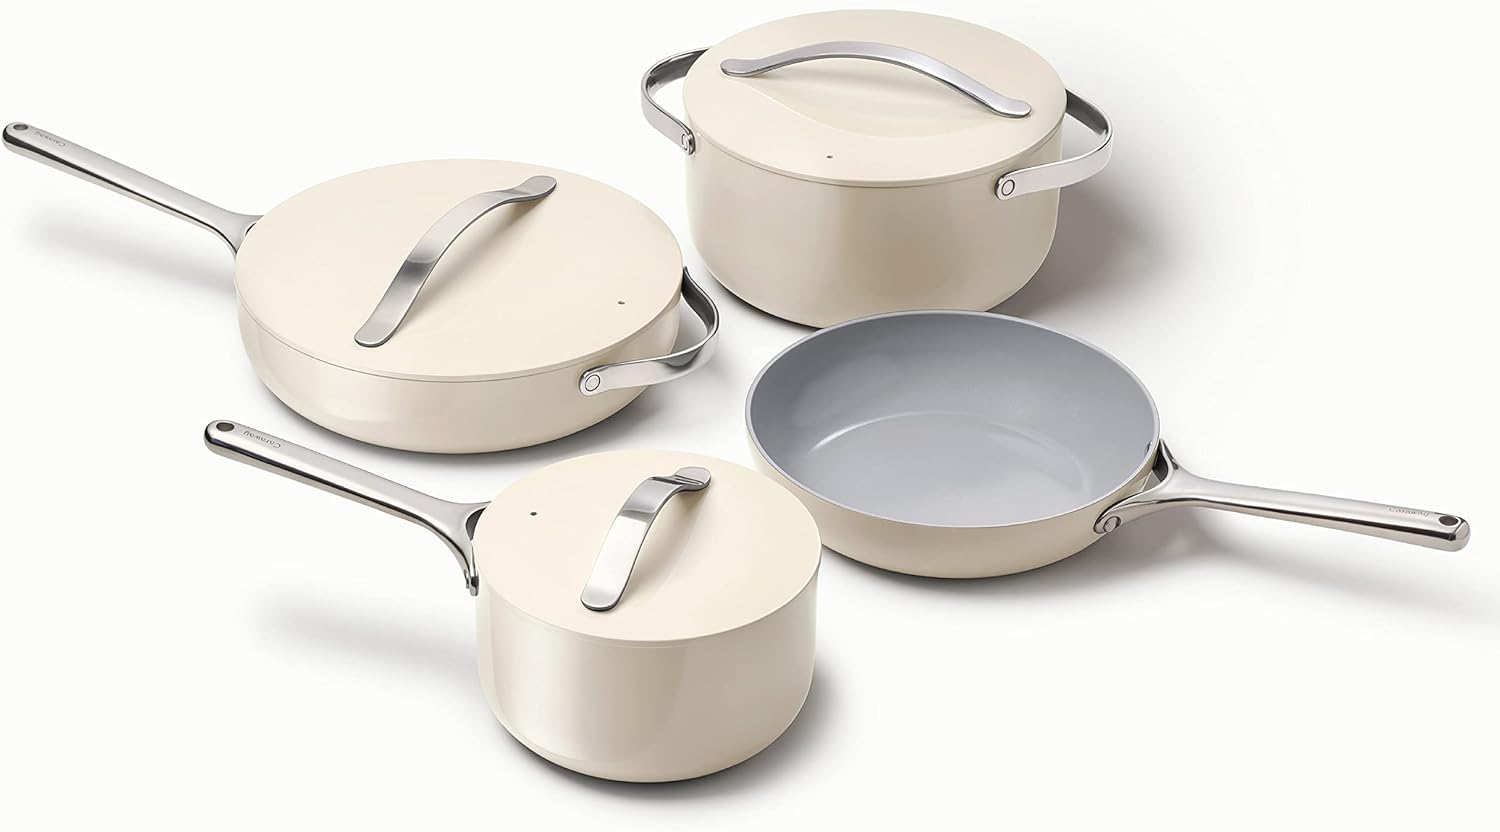 Why Go for Caraway Cookware?